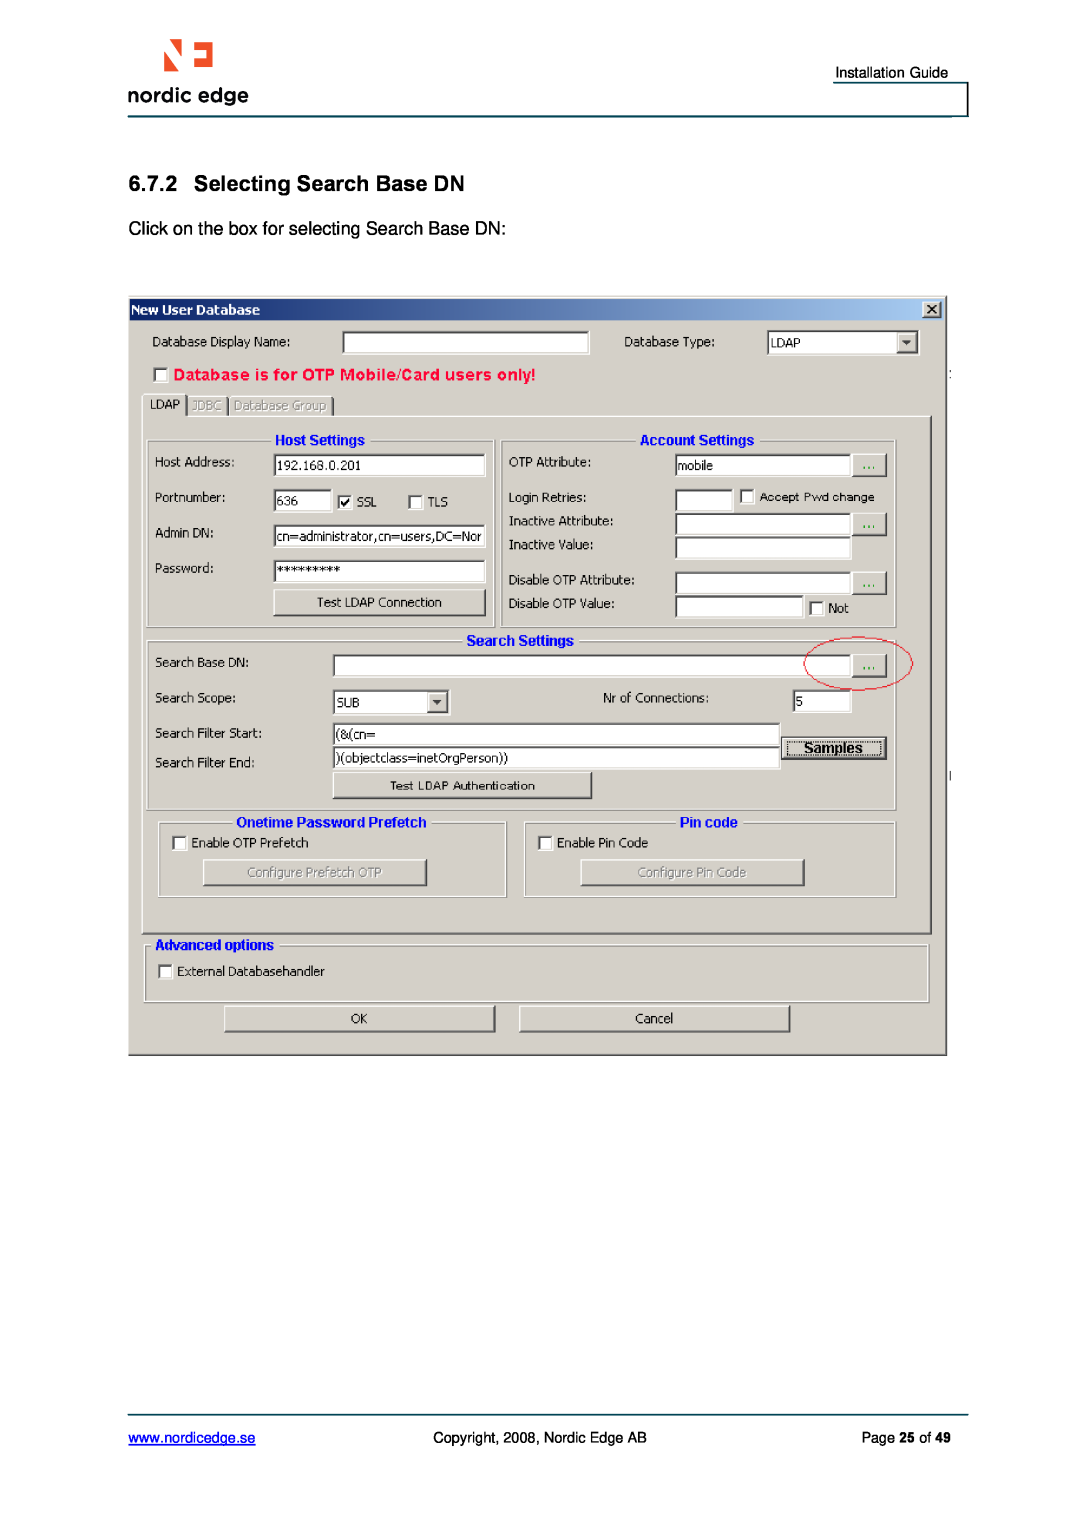 Cisco Systems ASA 5500 manual Selecting Search Base DN, Click on the box for selecting Search Base DN, Installation Guide 